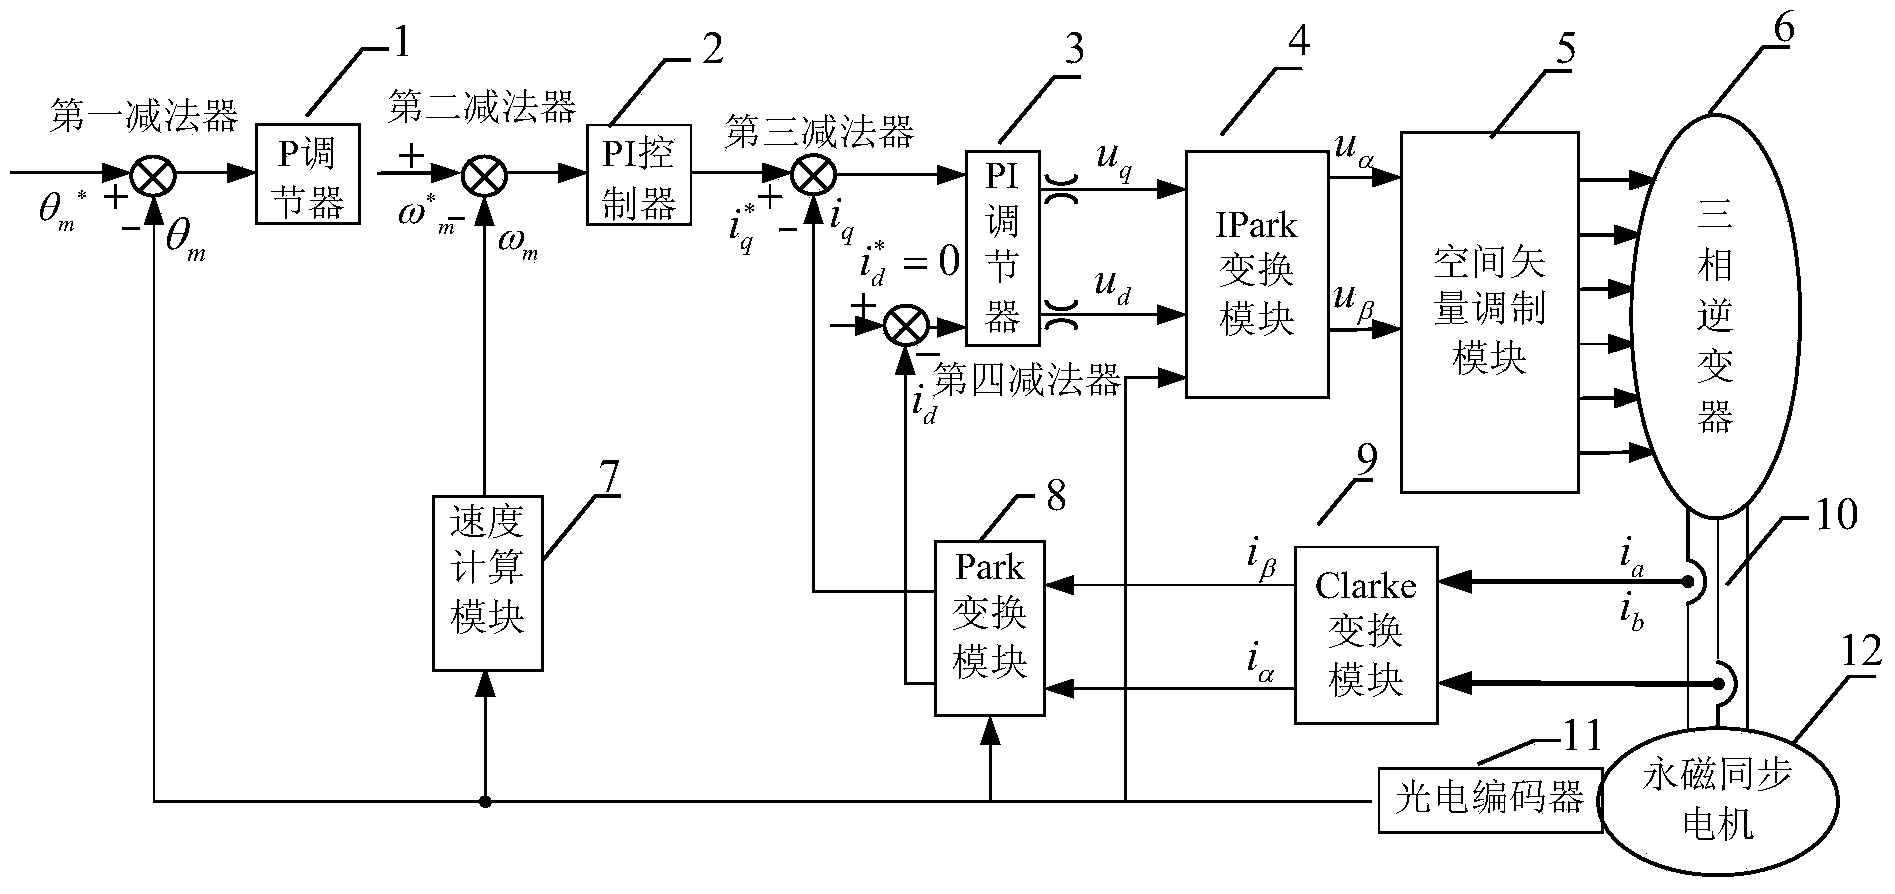 Quasi-sensorless position servo controlling device for permanent magnet synchronous motor and method thereof